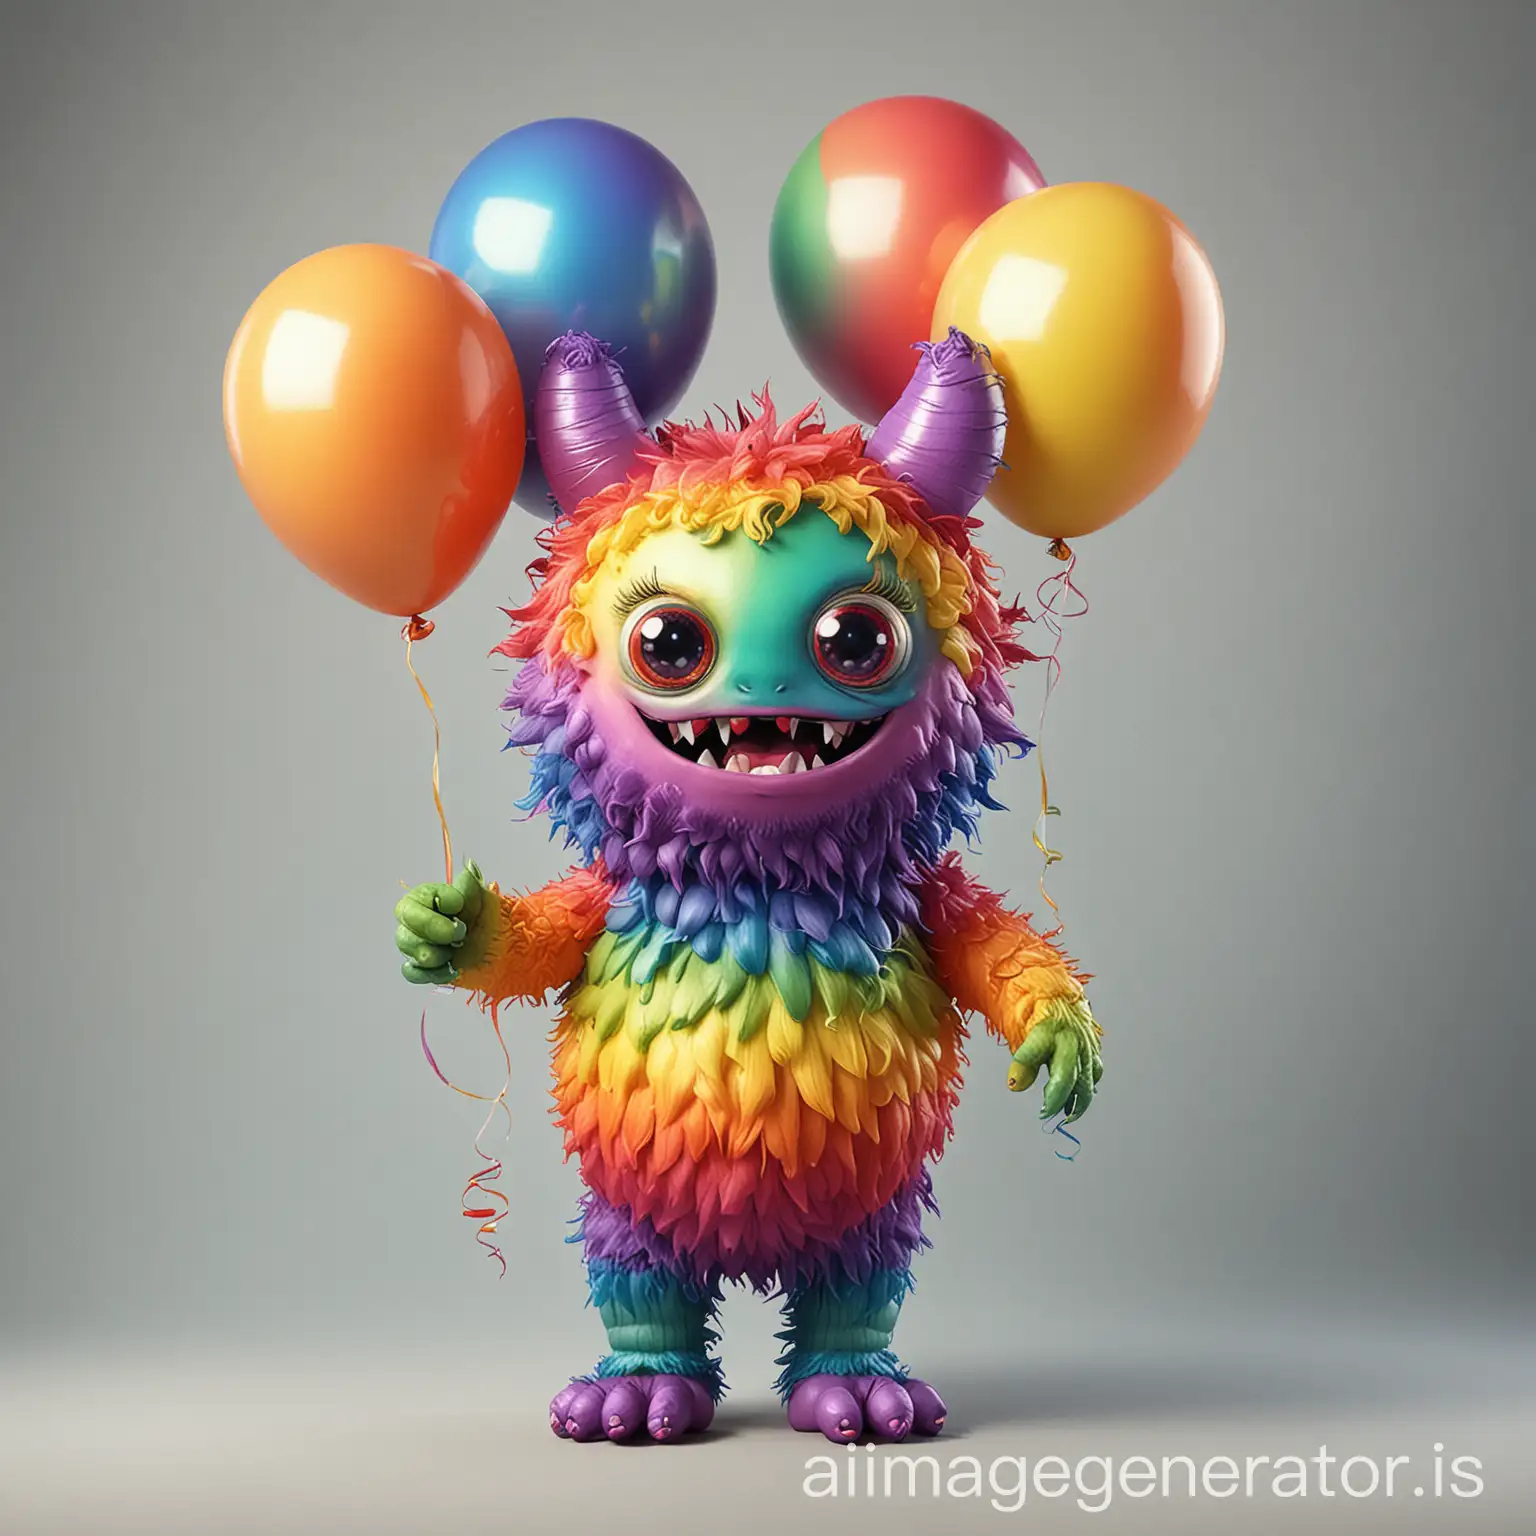 Adorable-Rainbow-Colored-Monster-Holding-Balloons